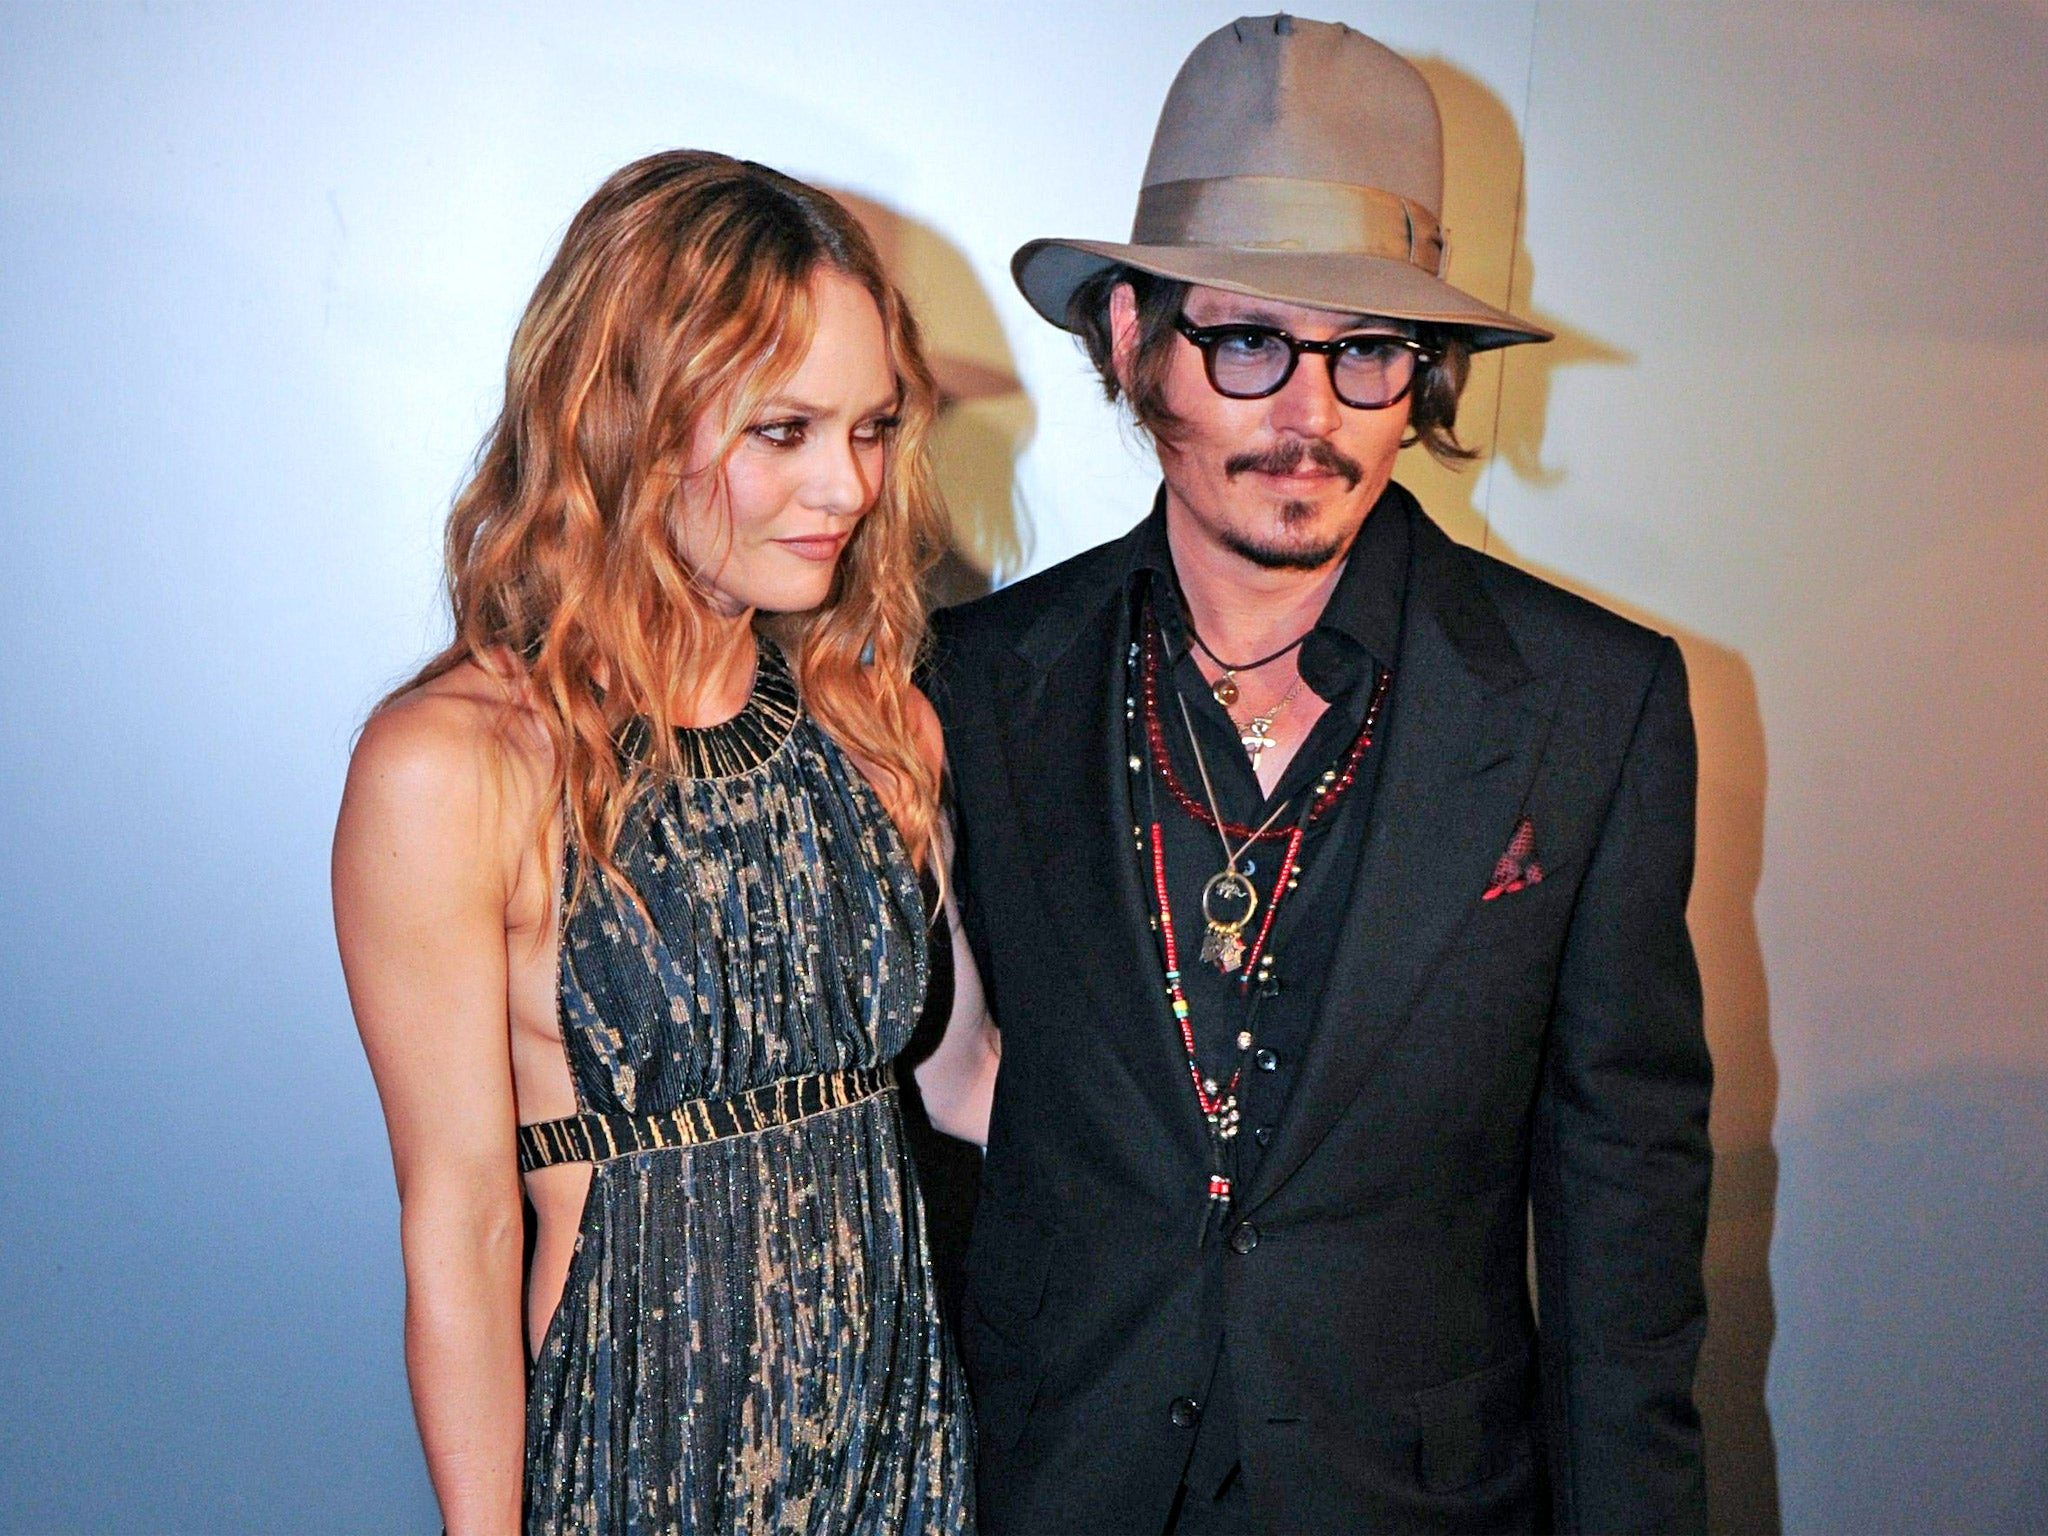 Johnny Depp and Vanessa Paradis were partners for 14 years